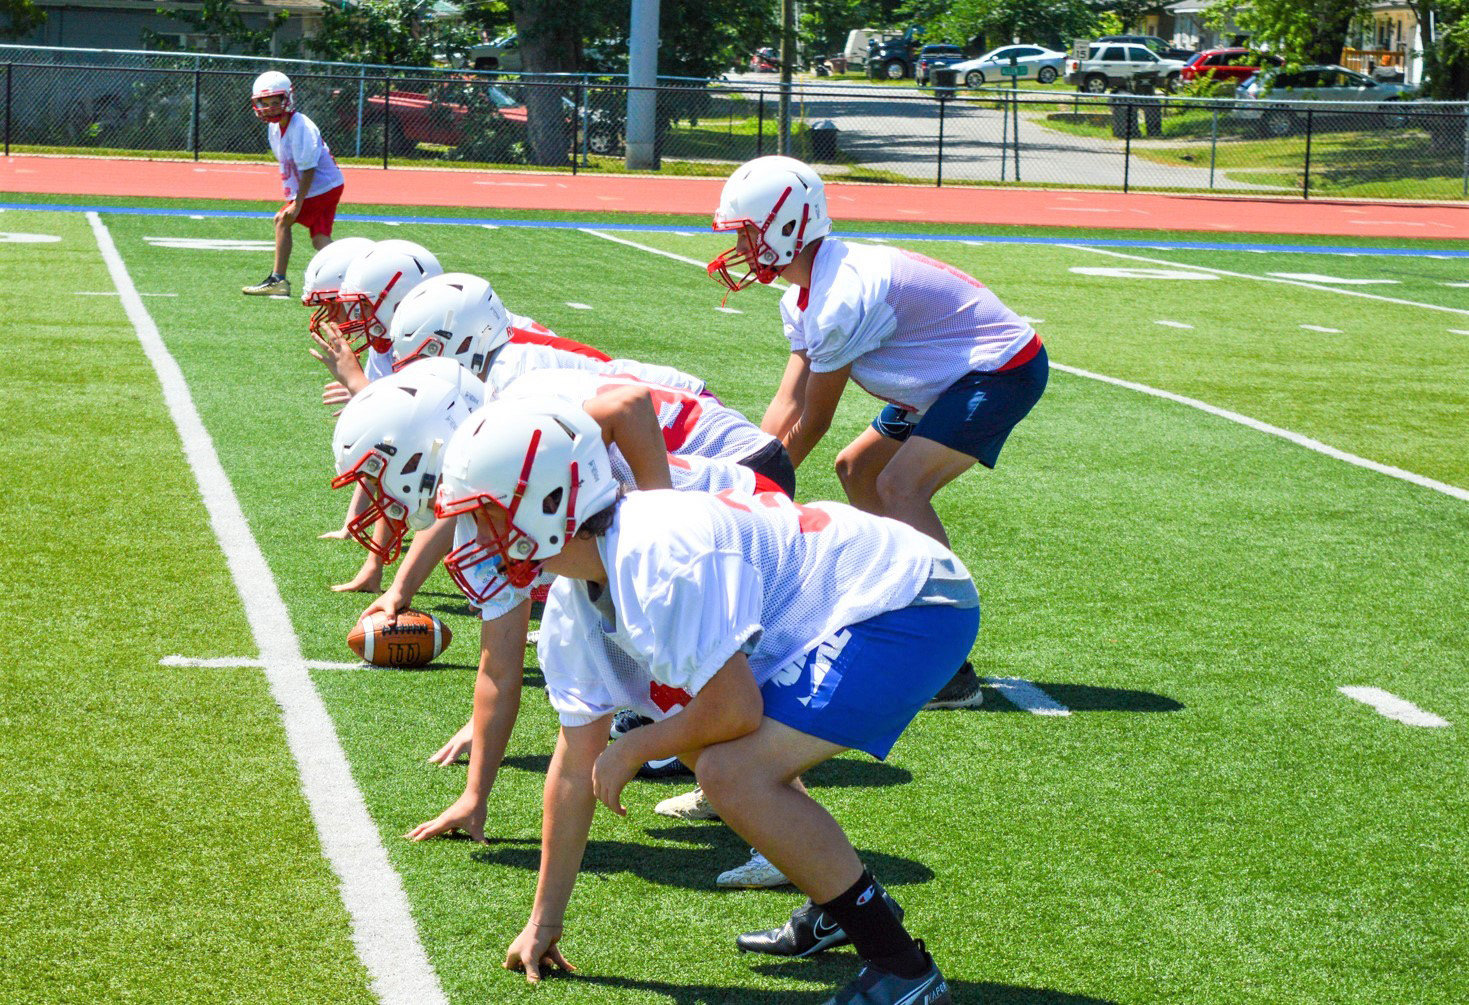 THE CMS camp had several offensive lines and backs and receivers practicing making and understanding the many different plays. Football may seem to be a simple game but the combination of the many different plays can be confusing to new players.